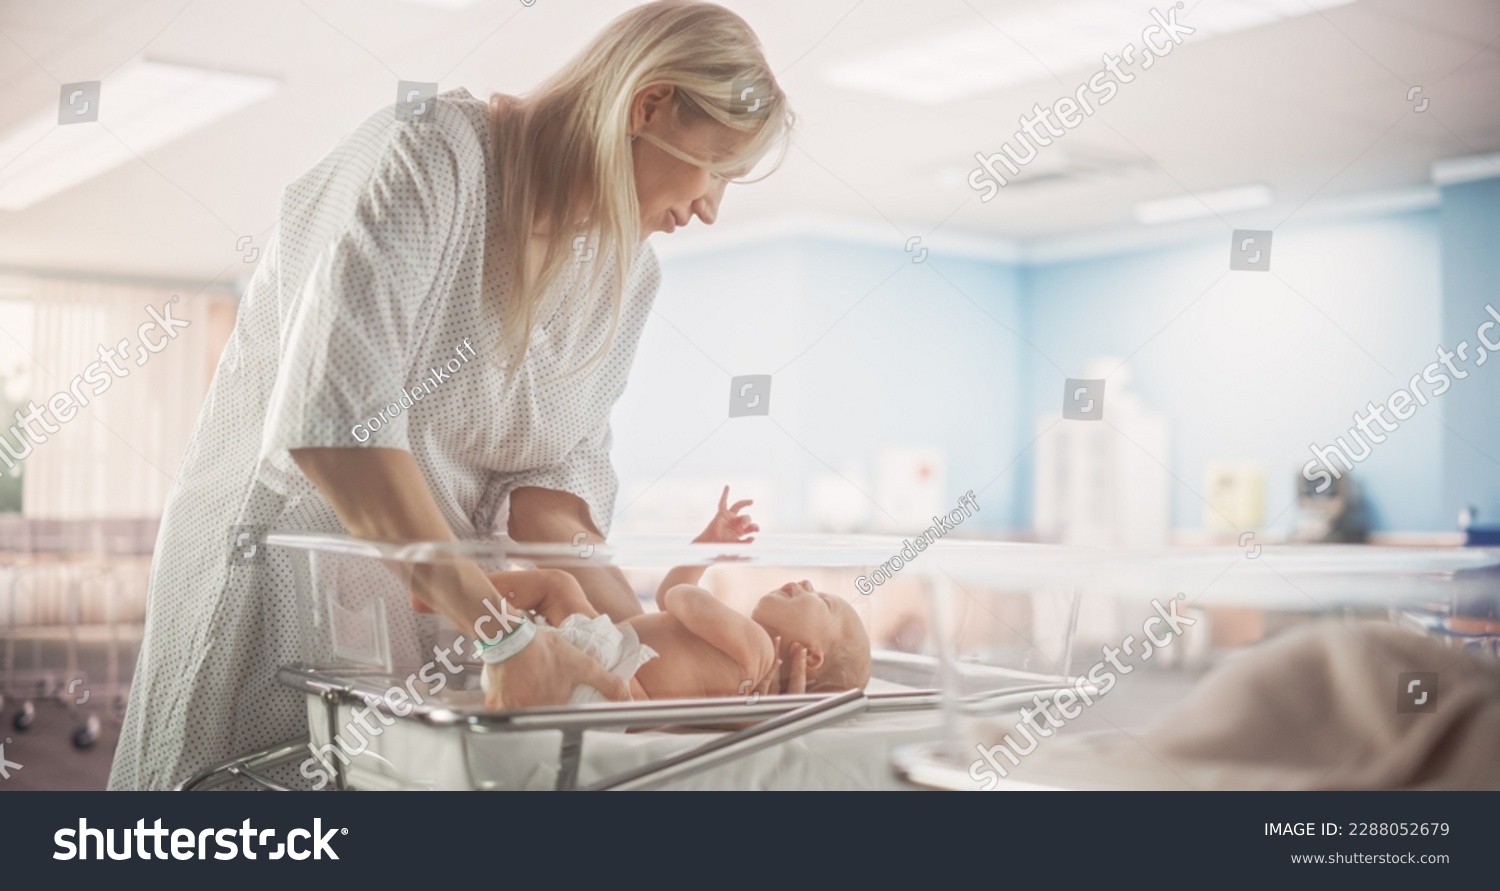 Mother Putting Down a Newborn Child on a Hospital Bassinet Bed in a Modern Nursery Clinic. Caring Mom Comforting Her New Born Child. Healthcare, Pregnancy and Motherhood Concept #2288052679